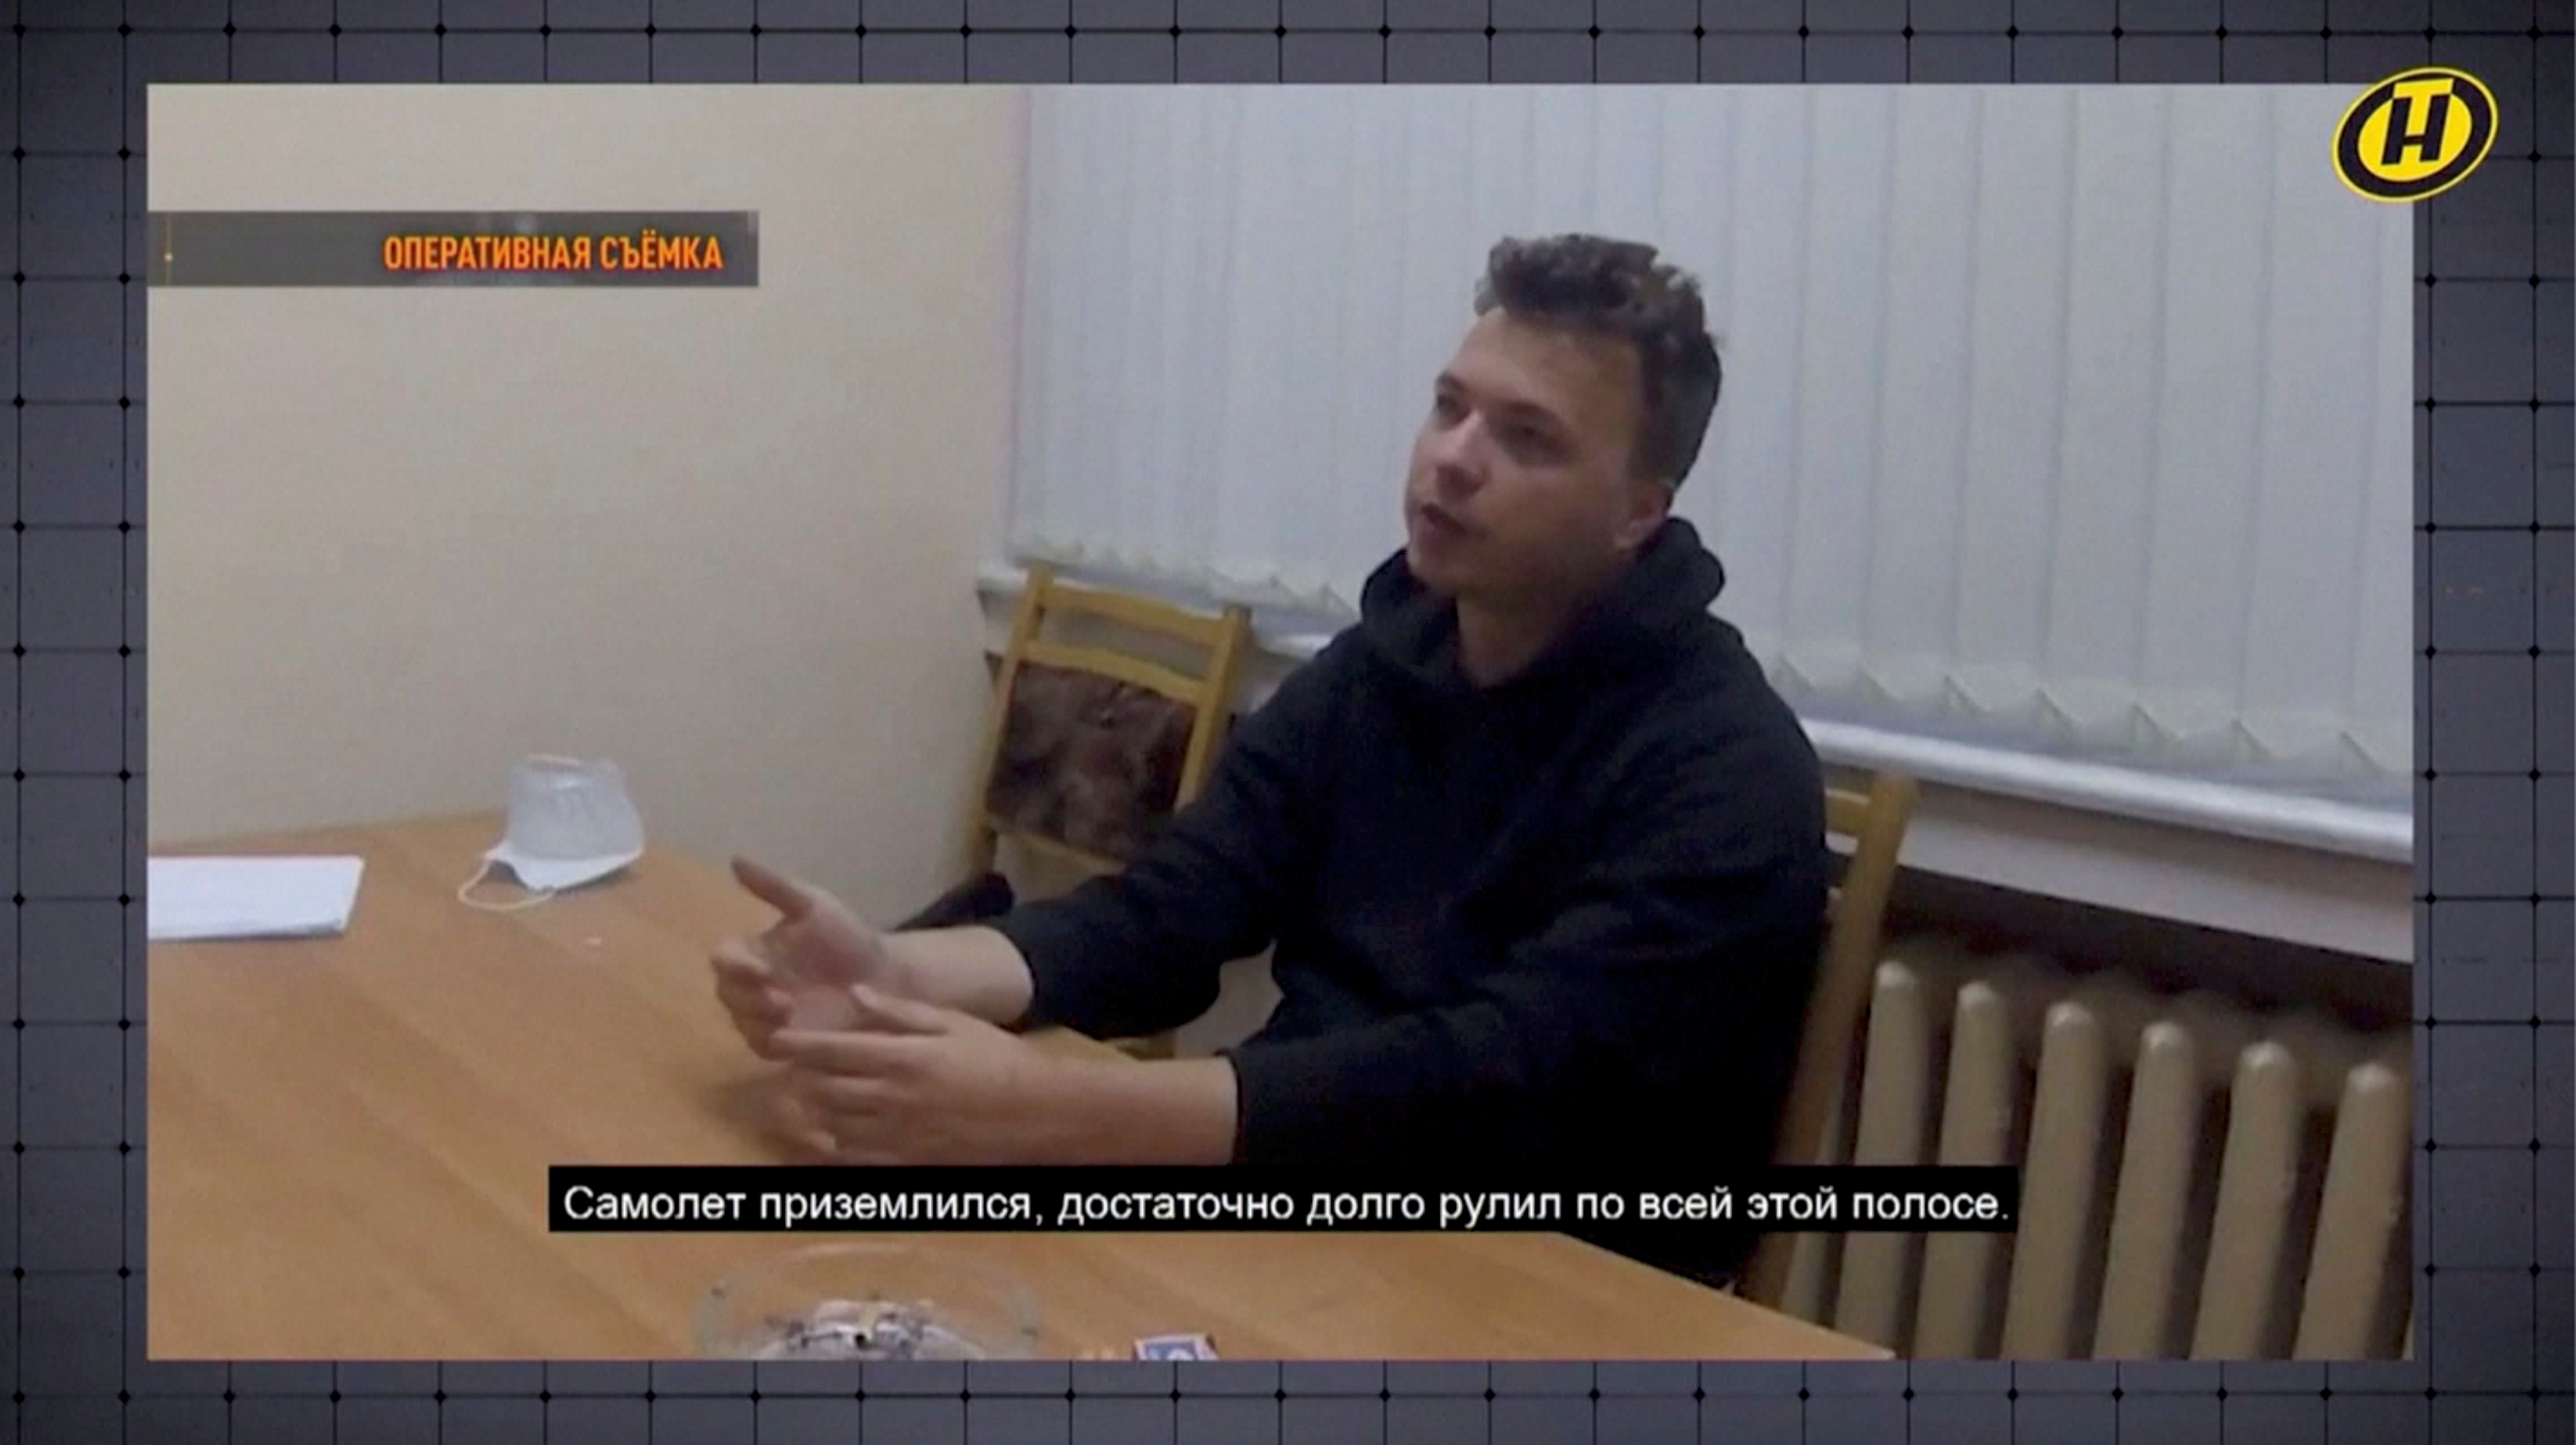 Belarusian dissident journalist Roman Protasevich speaks during questioning in an unknown location